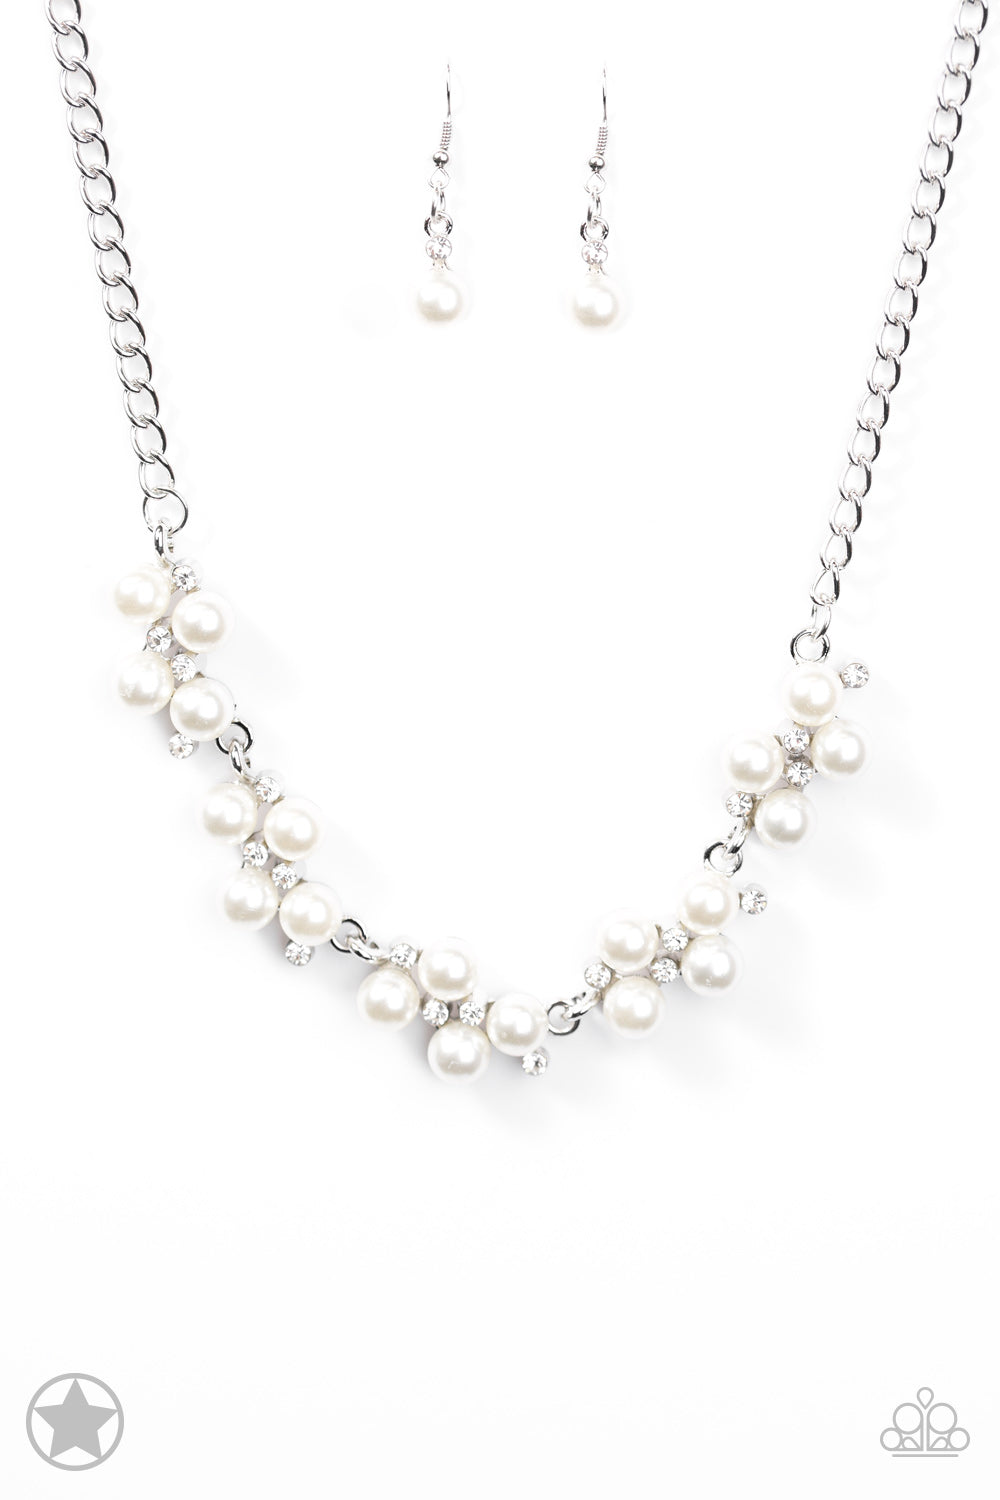 Paparazzi Accessories - Toast To Perfection - White Necklace